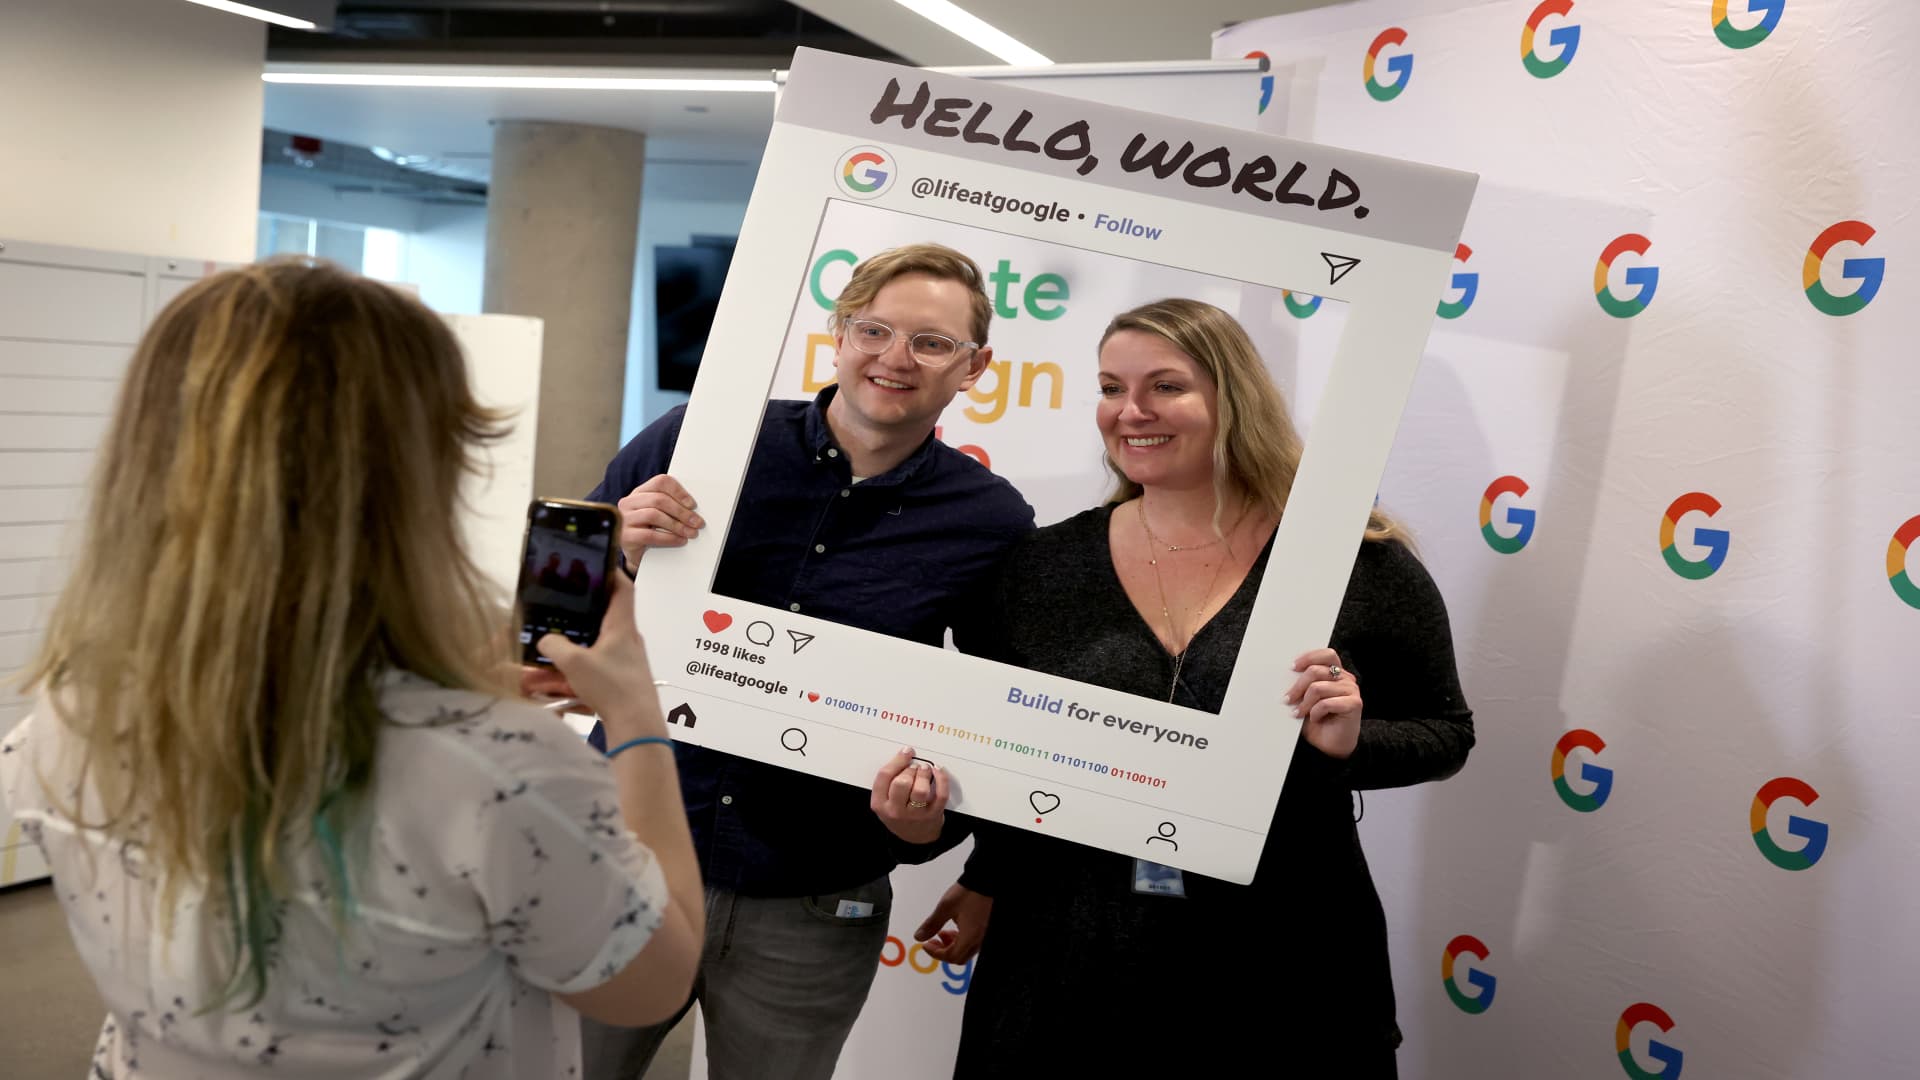 Employees are welcomed back to work with breakfast in the cafeteria at the Chicago Google offices on April 05, 2022 in Chicago, Illinois. Google employees began returning to work in the office this week for three days a week following a two-year hiatus caused by the COVID-19 pandemic. 